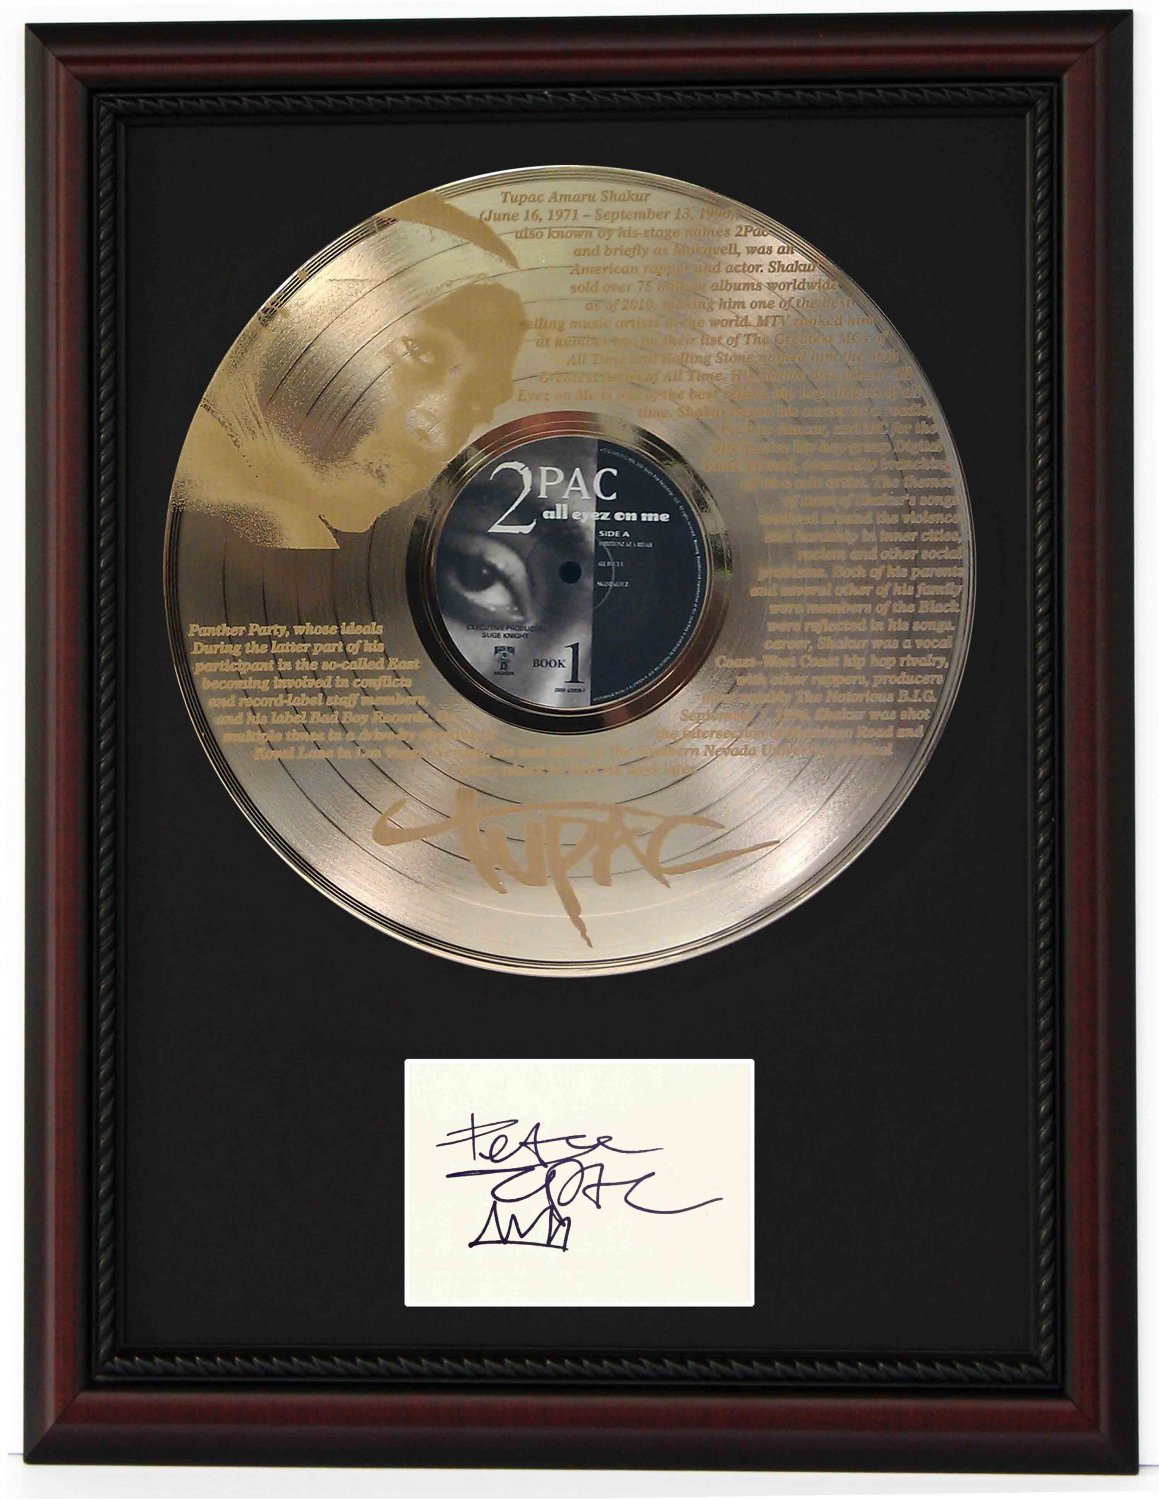 TUPAC "biography, all eyez on me" Cherry Wood Gold LP Record Framed Etched Signature Display